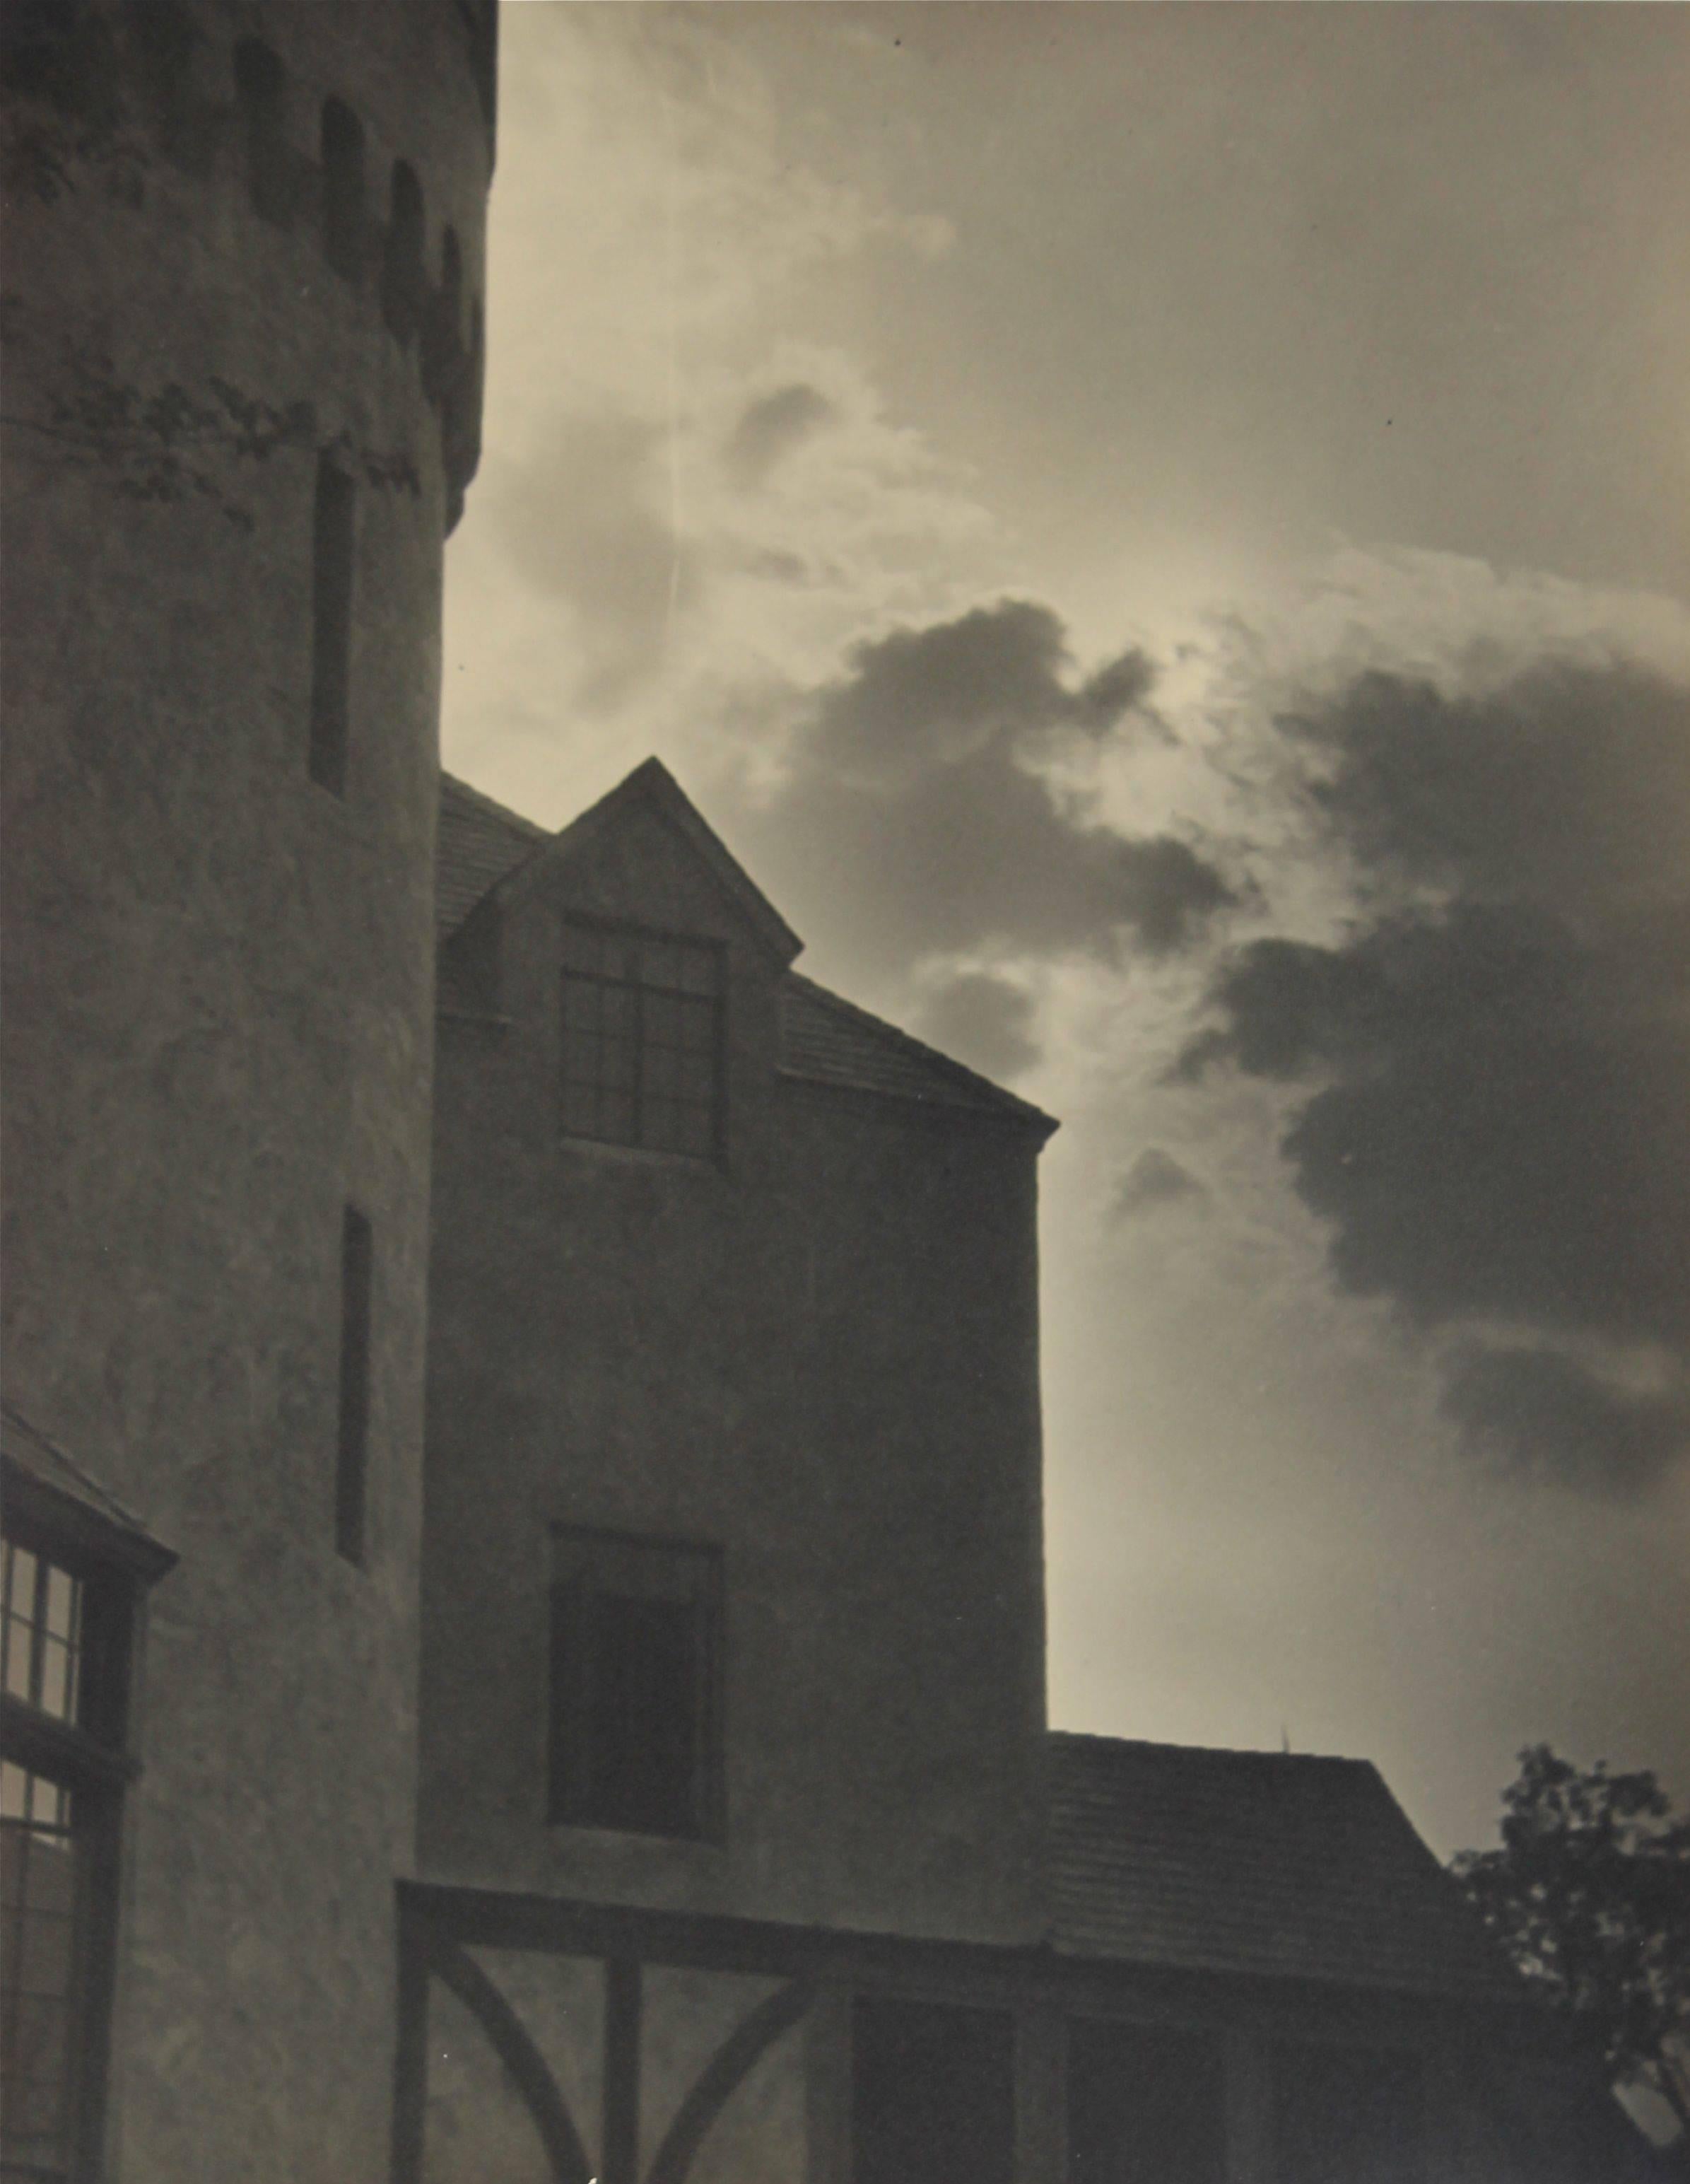 Dr. F.W. Buraky Black and White Photograph - Castle & Clouds Photograph, Circa 1920